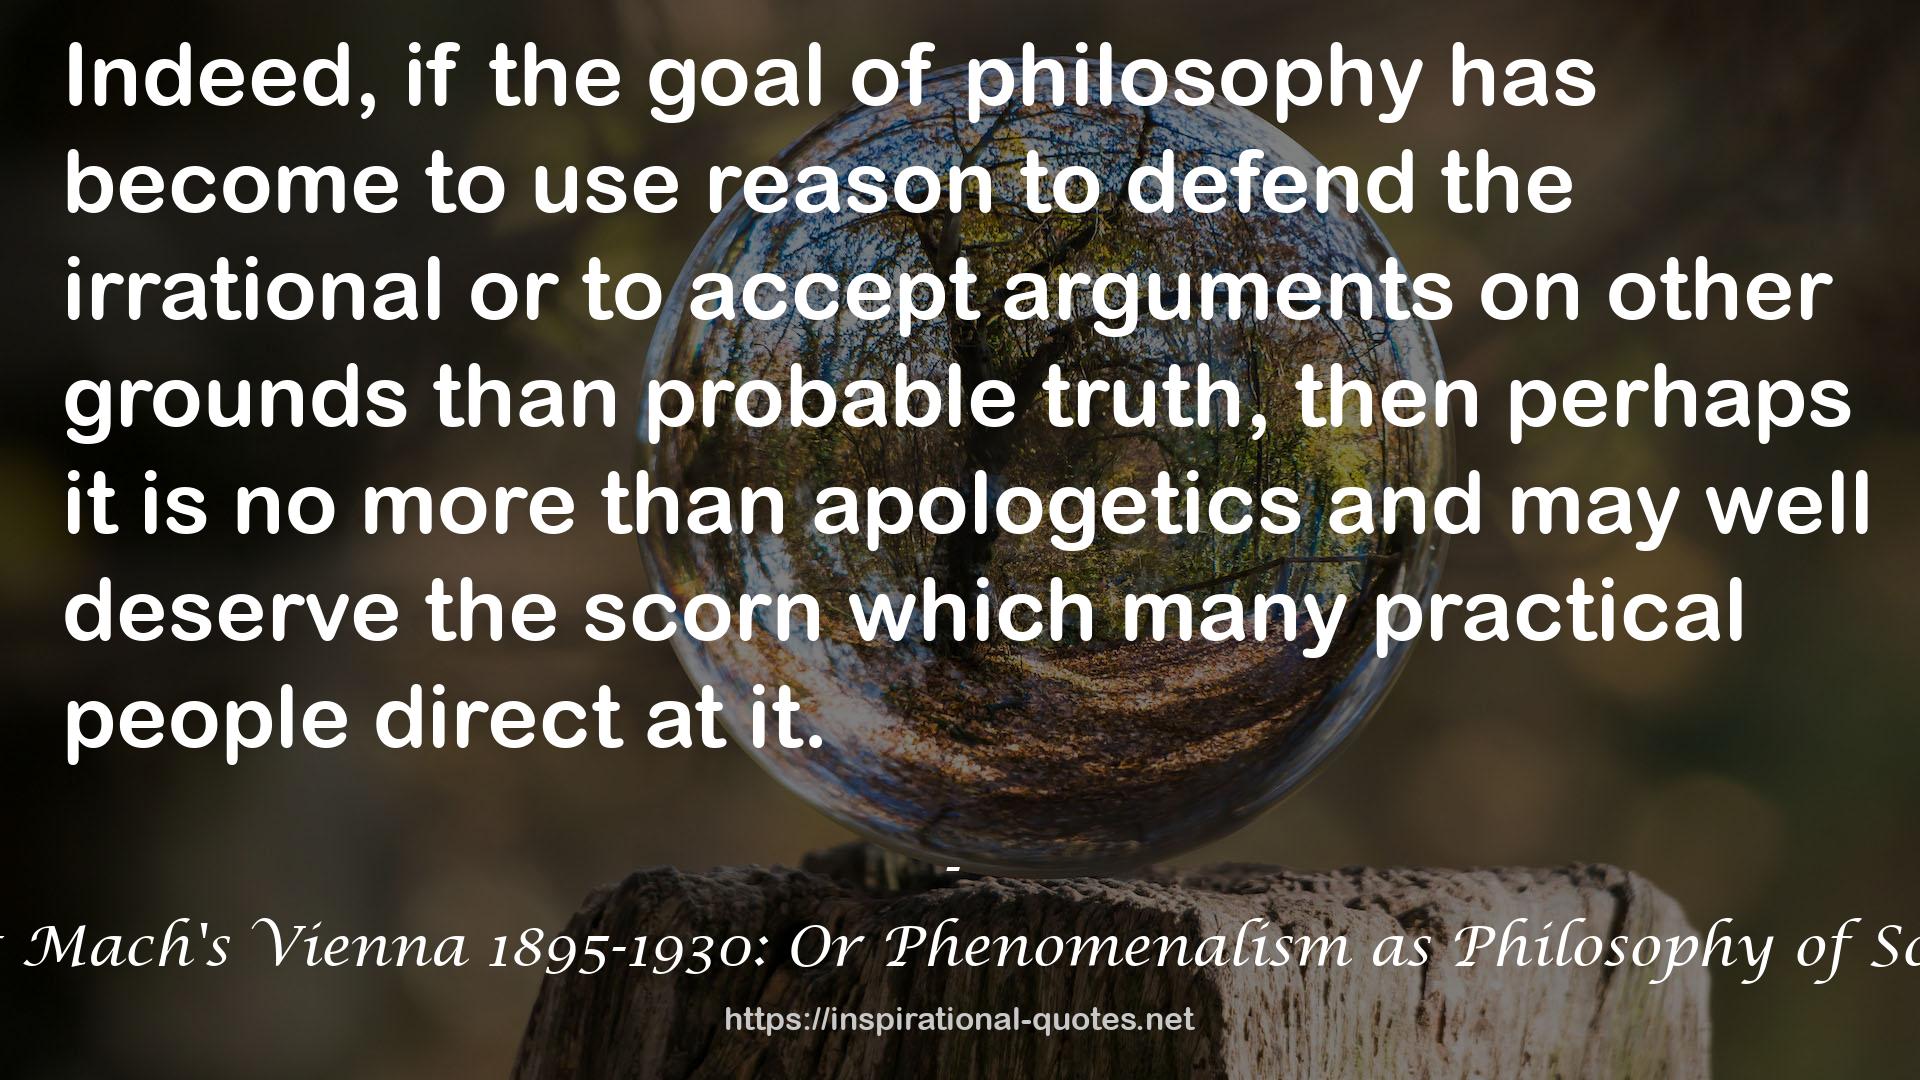 Ernst Mach's Vienna 1895-1930: Or Phenomenalism as Philosophy of Science QUOTES